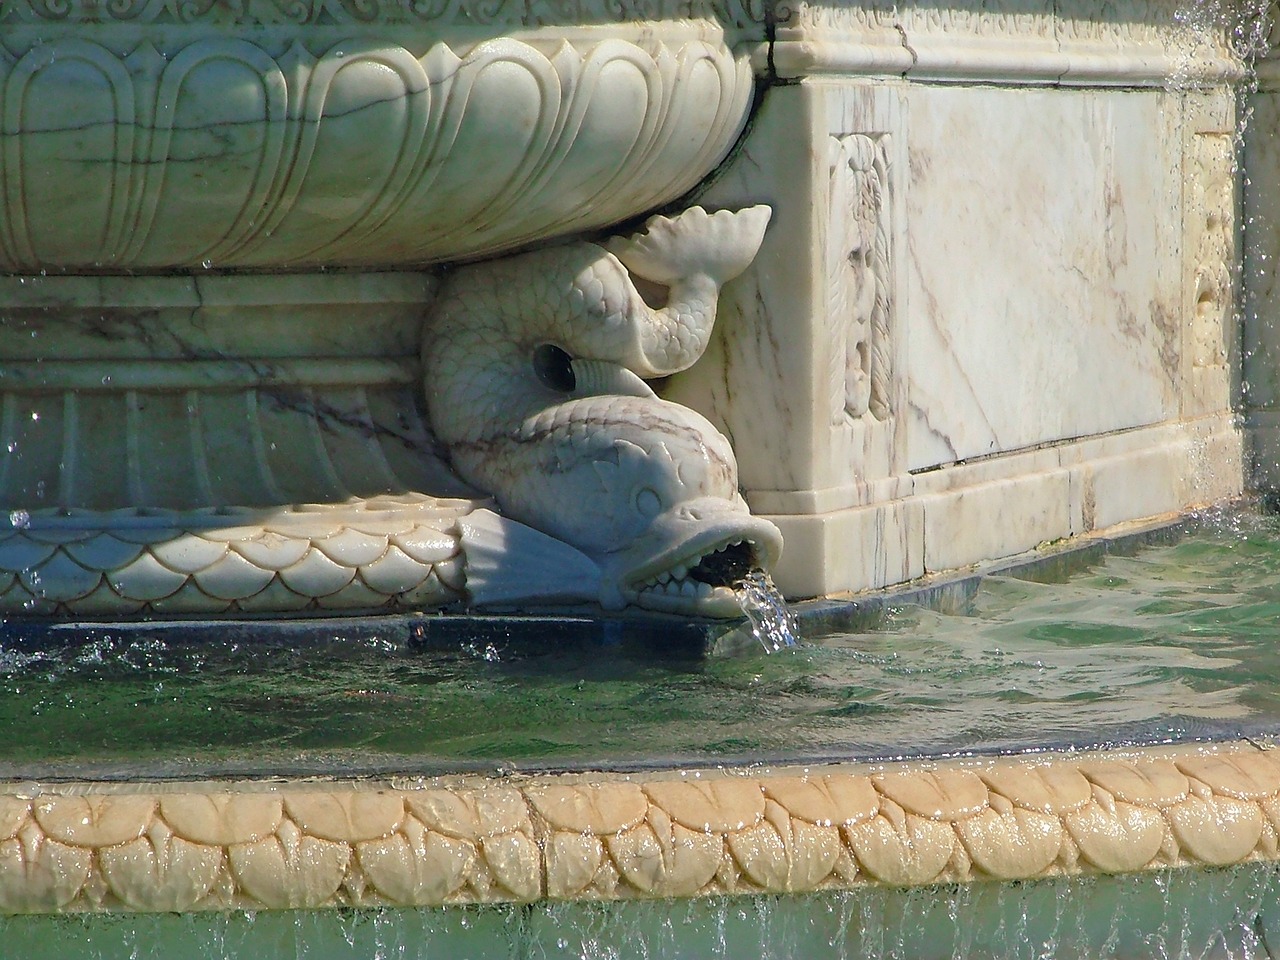 A statue of a fish present at Belle Isle Park in Detroit, MI